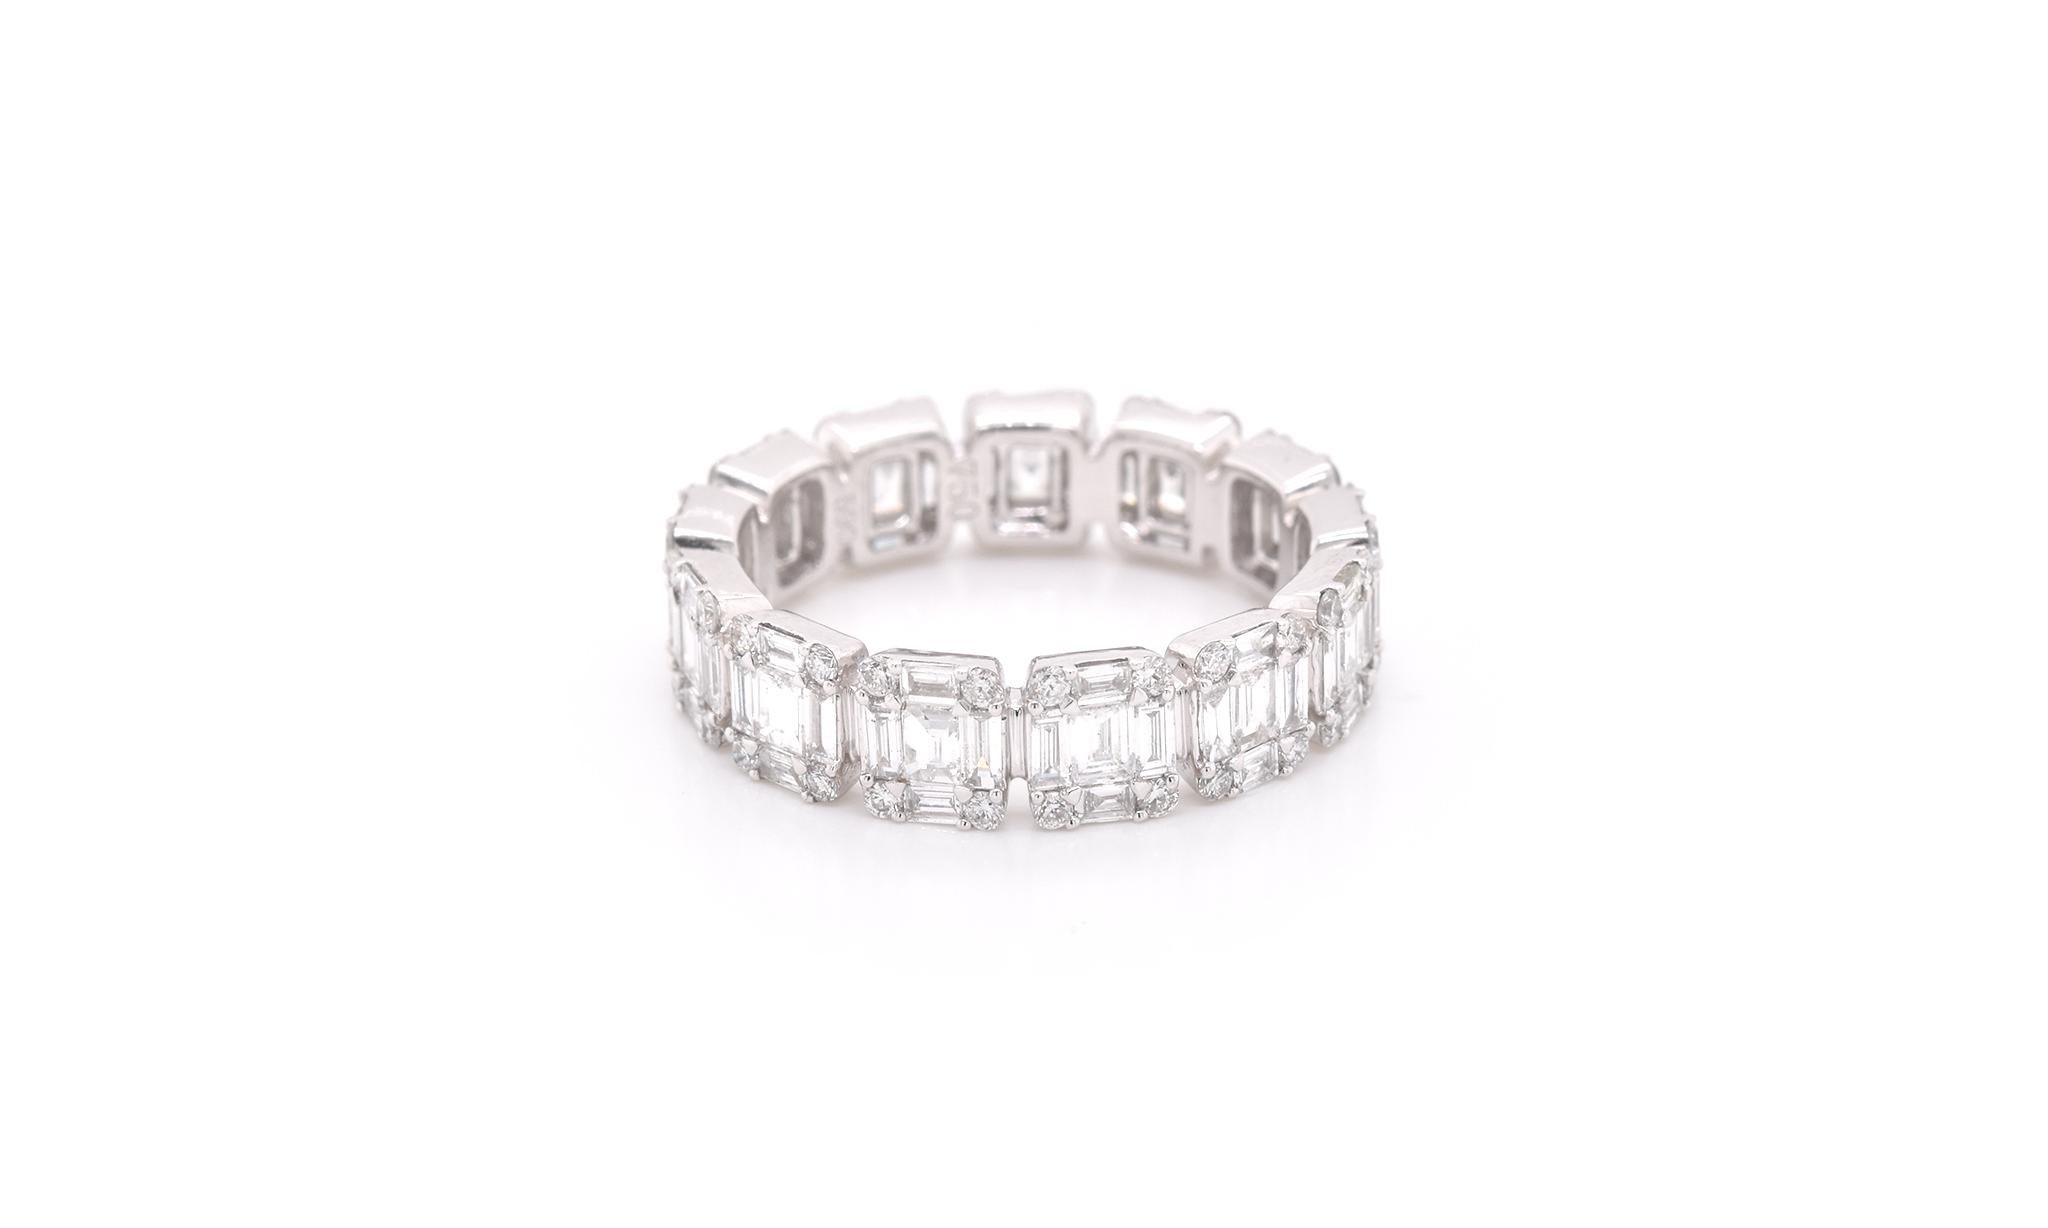 Designer: custom design
Material: 18k white gold
Diamonds: 52 round brilliant cut = .43cttw
Color: G
Clarity: VS
Diamonds: 65 baguette cut = 1.60cttw
Color: G
Clarity: VS
Ring size: 6.25 
Dimensions: ring is 7.51mm
Weight: 8.24 grams 
